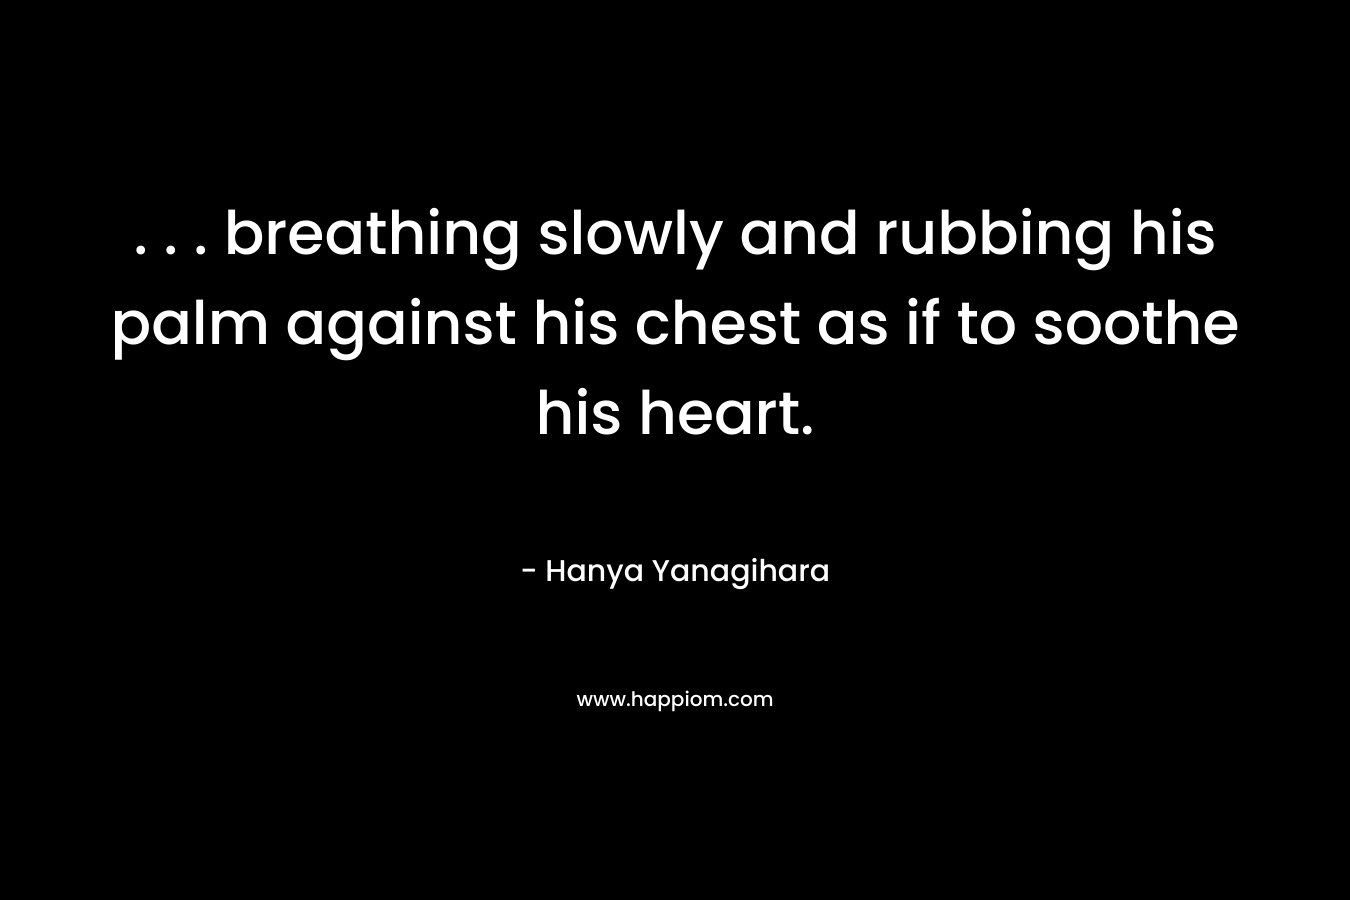 . . . breathing slowly and rubbing his palm against his chest as if to soothe his heart.